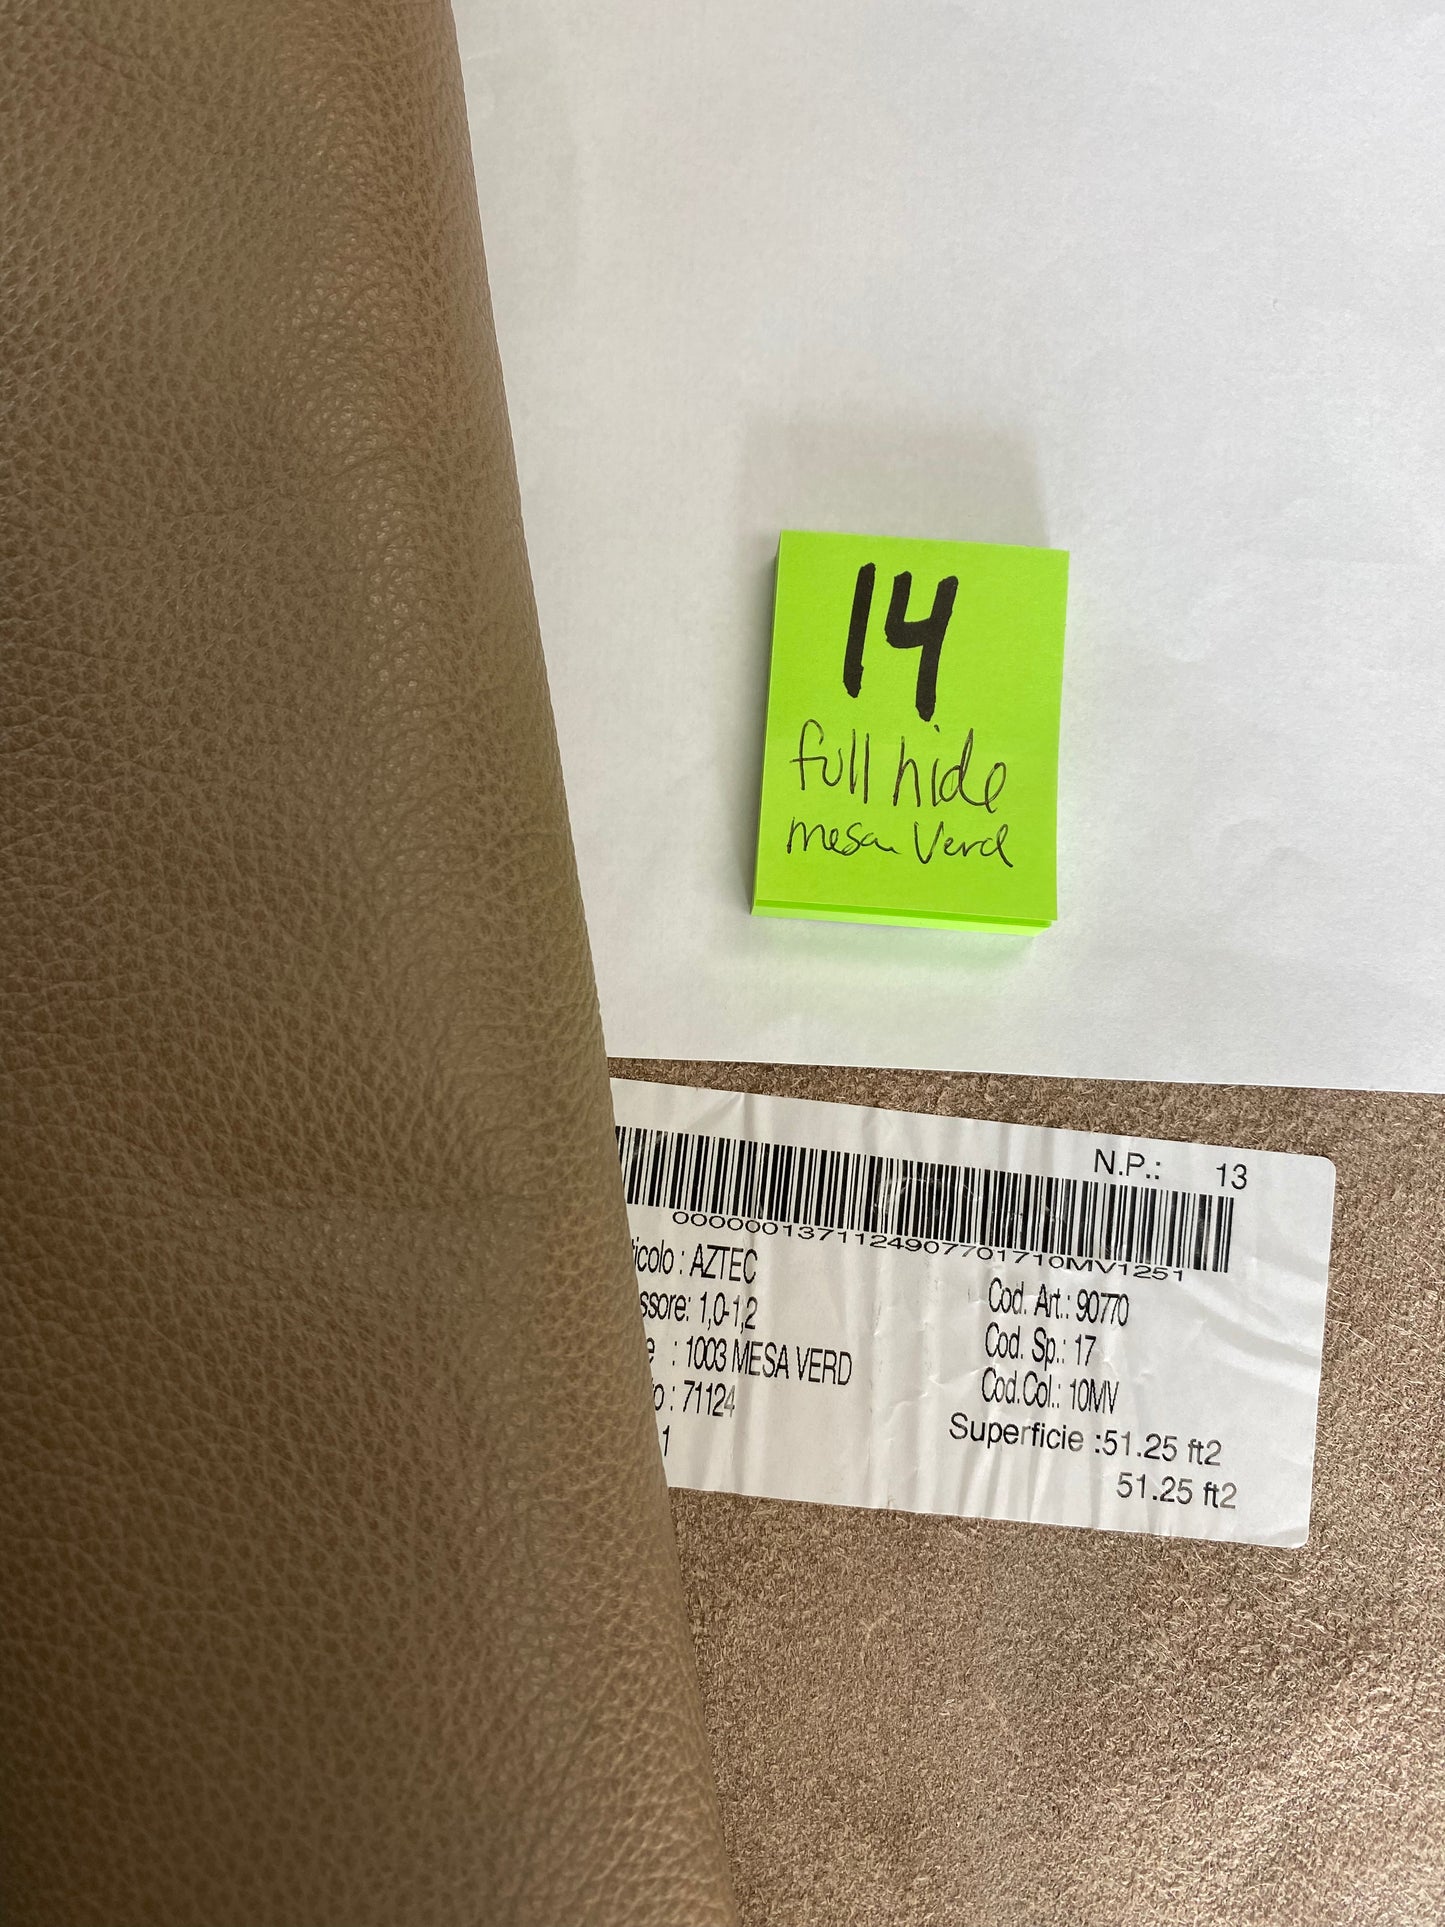 Leather Mesa verd (cappuchino) Full hide 1.0-1.2mm  Leather#14  - USA Shipping Included in Price!